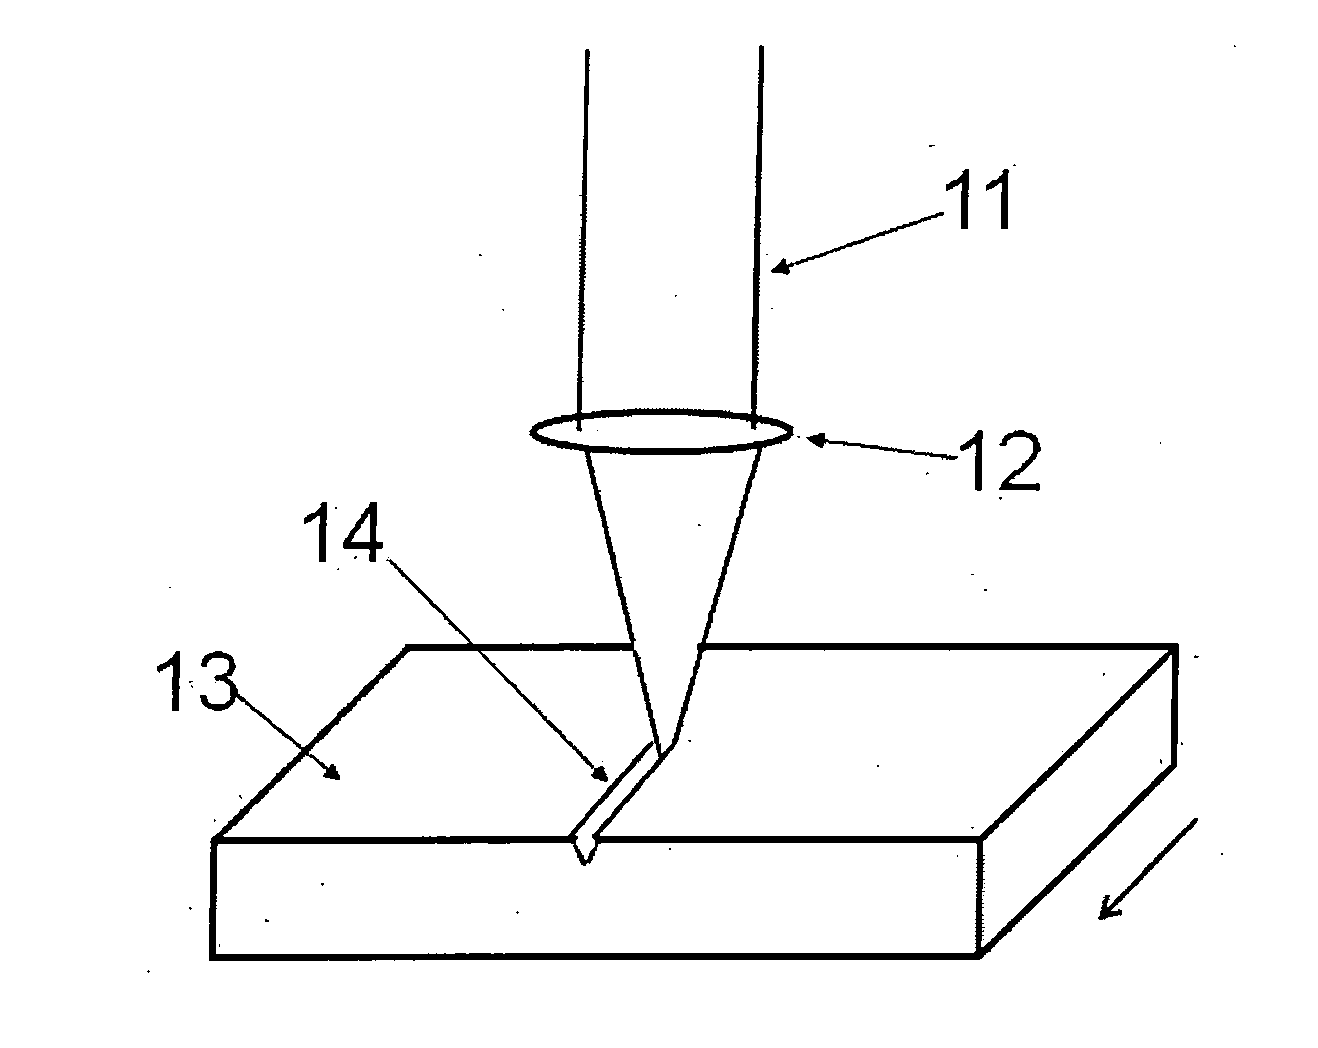 Method and apparatus for laser machining relatively narrow and relatively wide structures